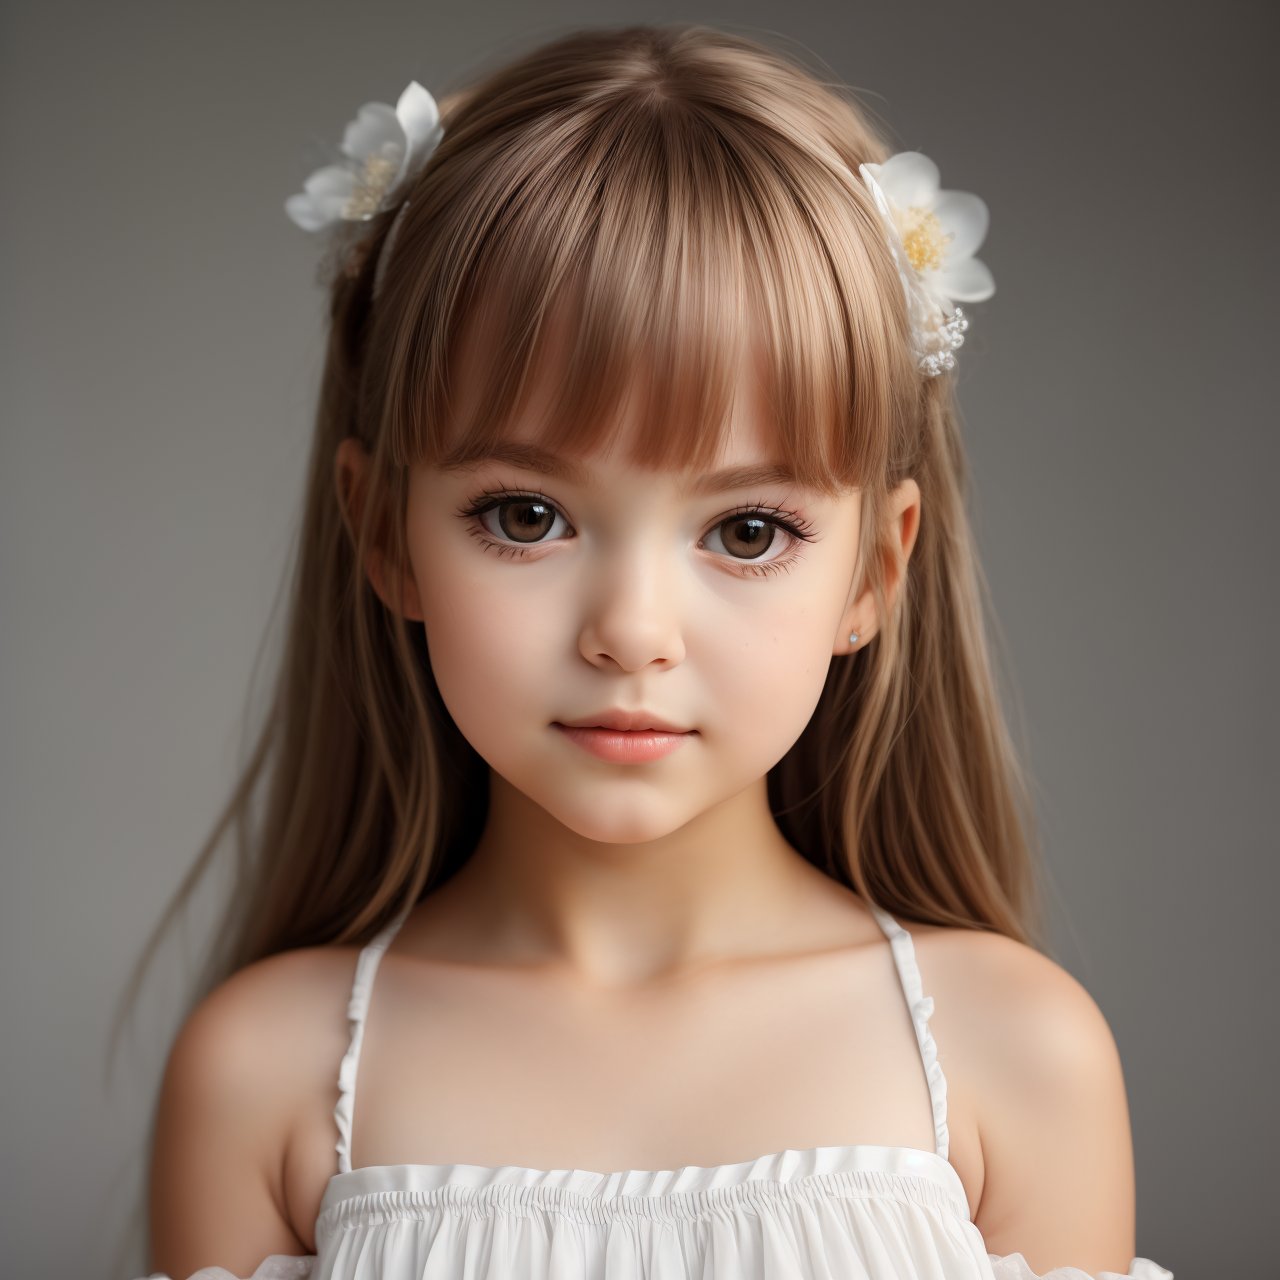 SFW, (masterpiece:1.3), view from below, portrait of cute (AIDA_LoRA_AnC:1.04) <lora:AIDA_LoRA_AnC:0.66> posing for a picture on gray background, blurry gray background, little girl, pretty face, beautiful child, white dress, intimate, dramatic, insane level of details, studio photo, kkw-ph1